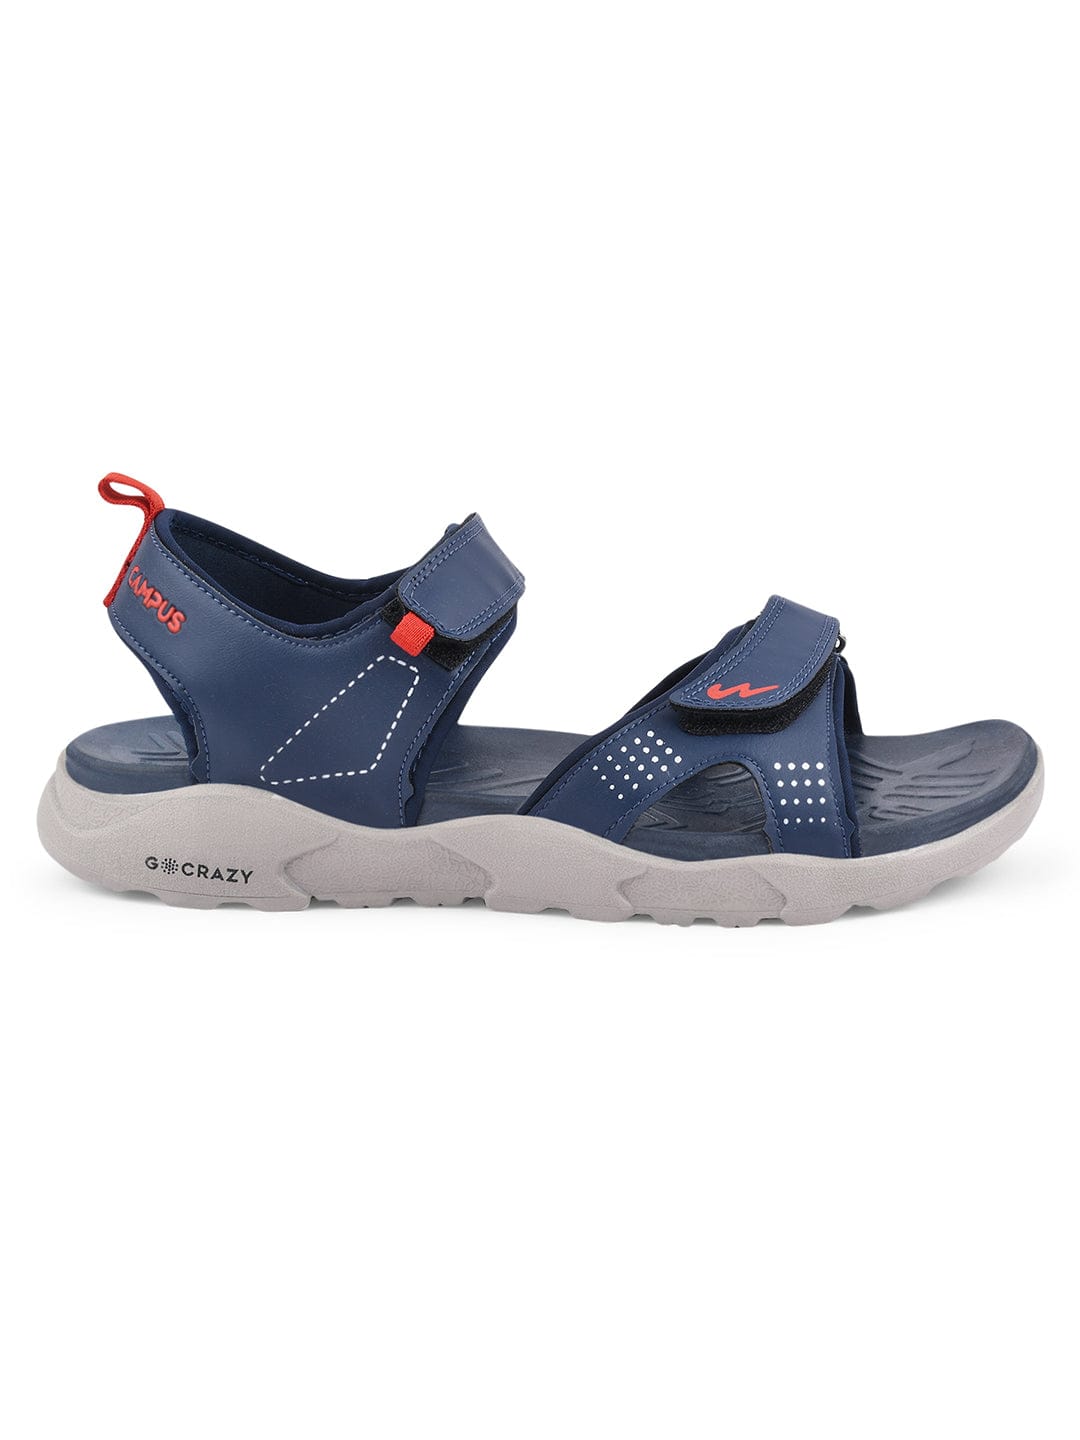 Buy Sandals For Men: Corel-Gry-Red | Campus Shoes